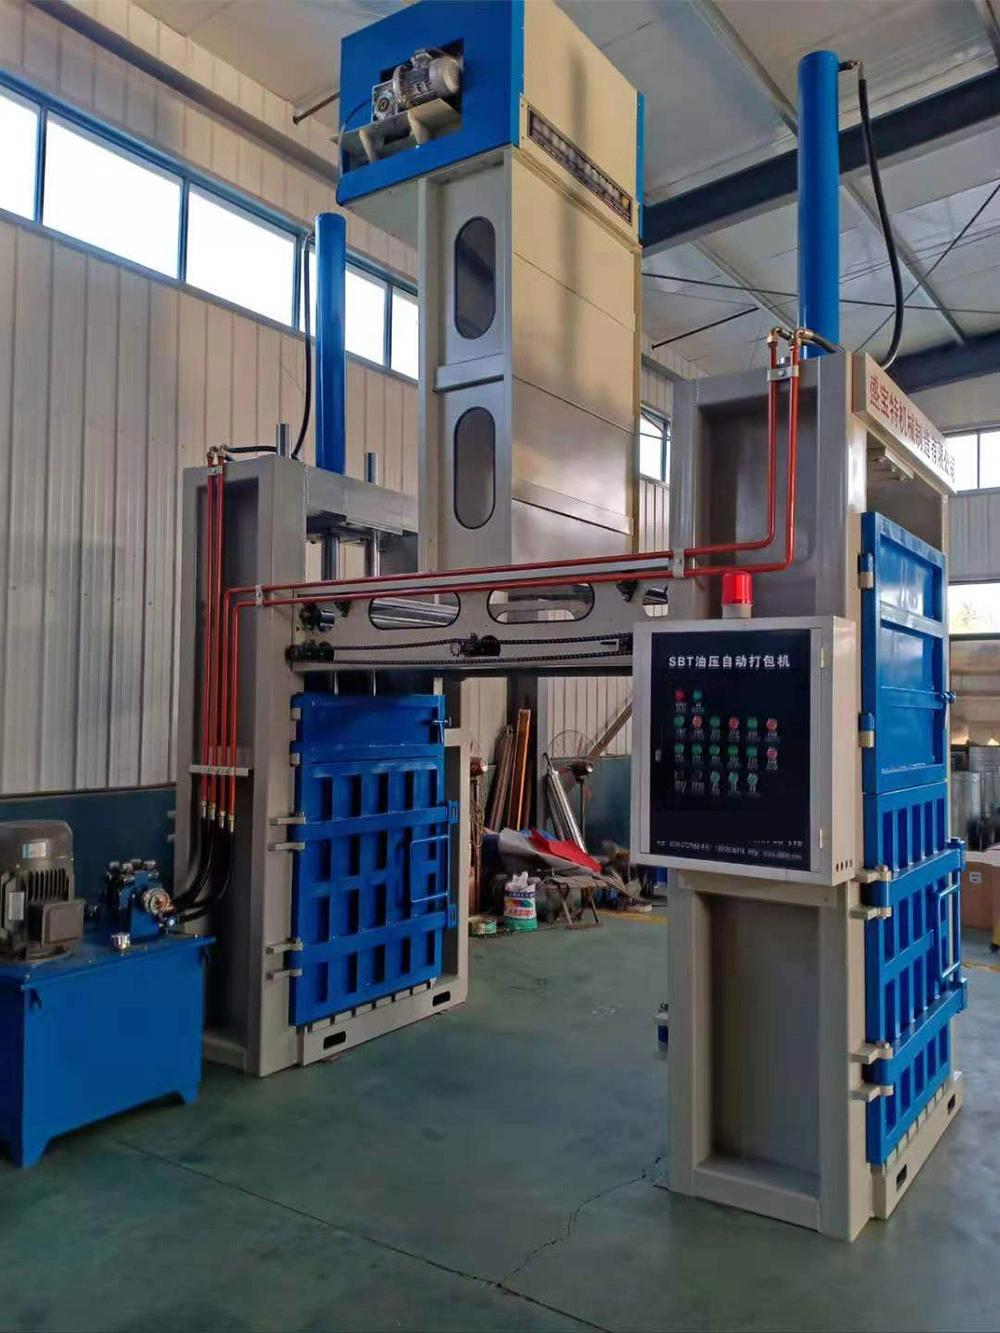 Best Selling Vertical U-Shaped Pressure Balance System Baler Hydraulic Press Waste Plastic Film Packaging Machine Factory Price Baler for Recycling Industry